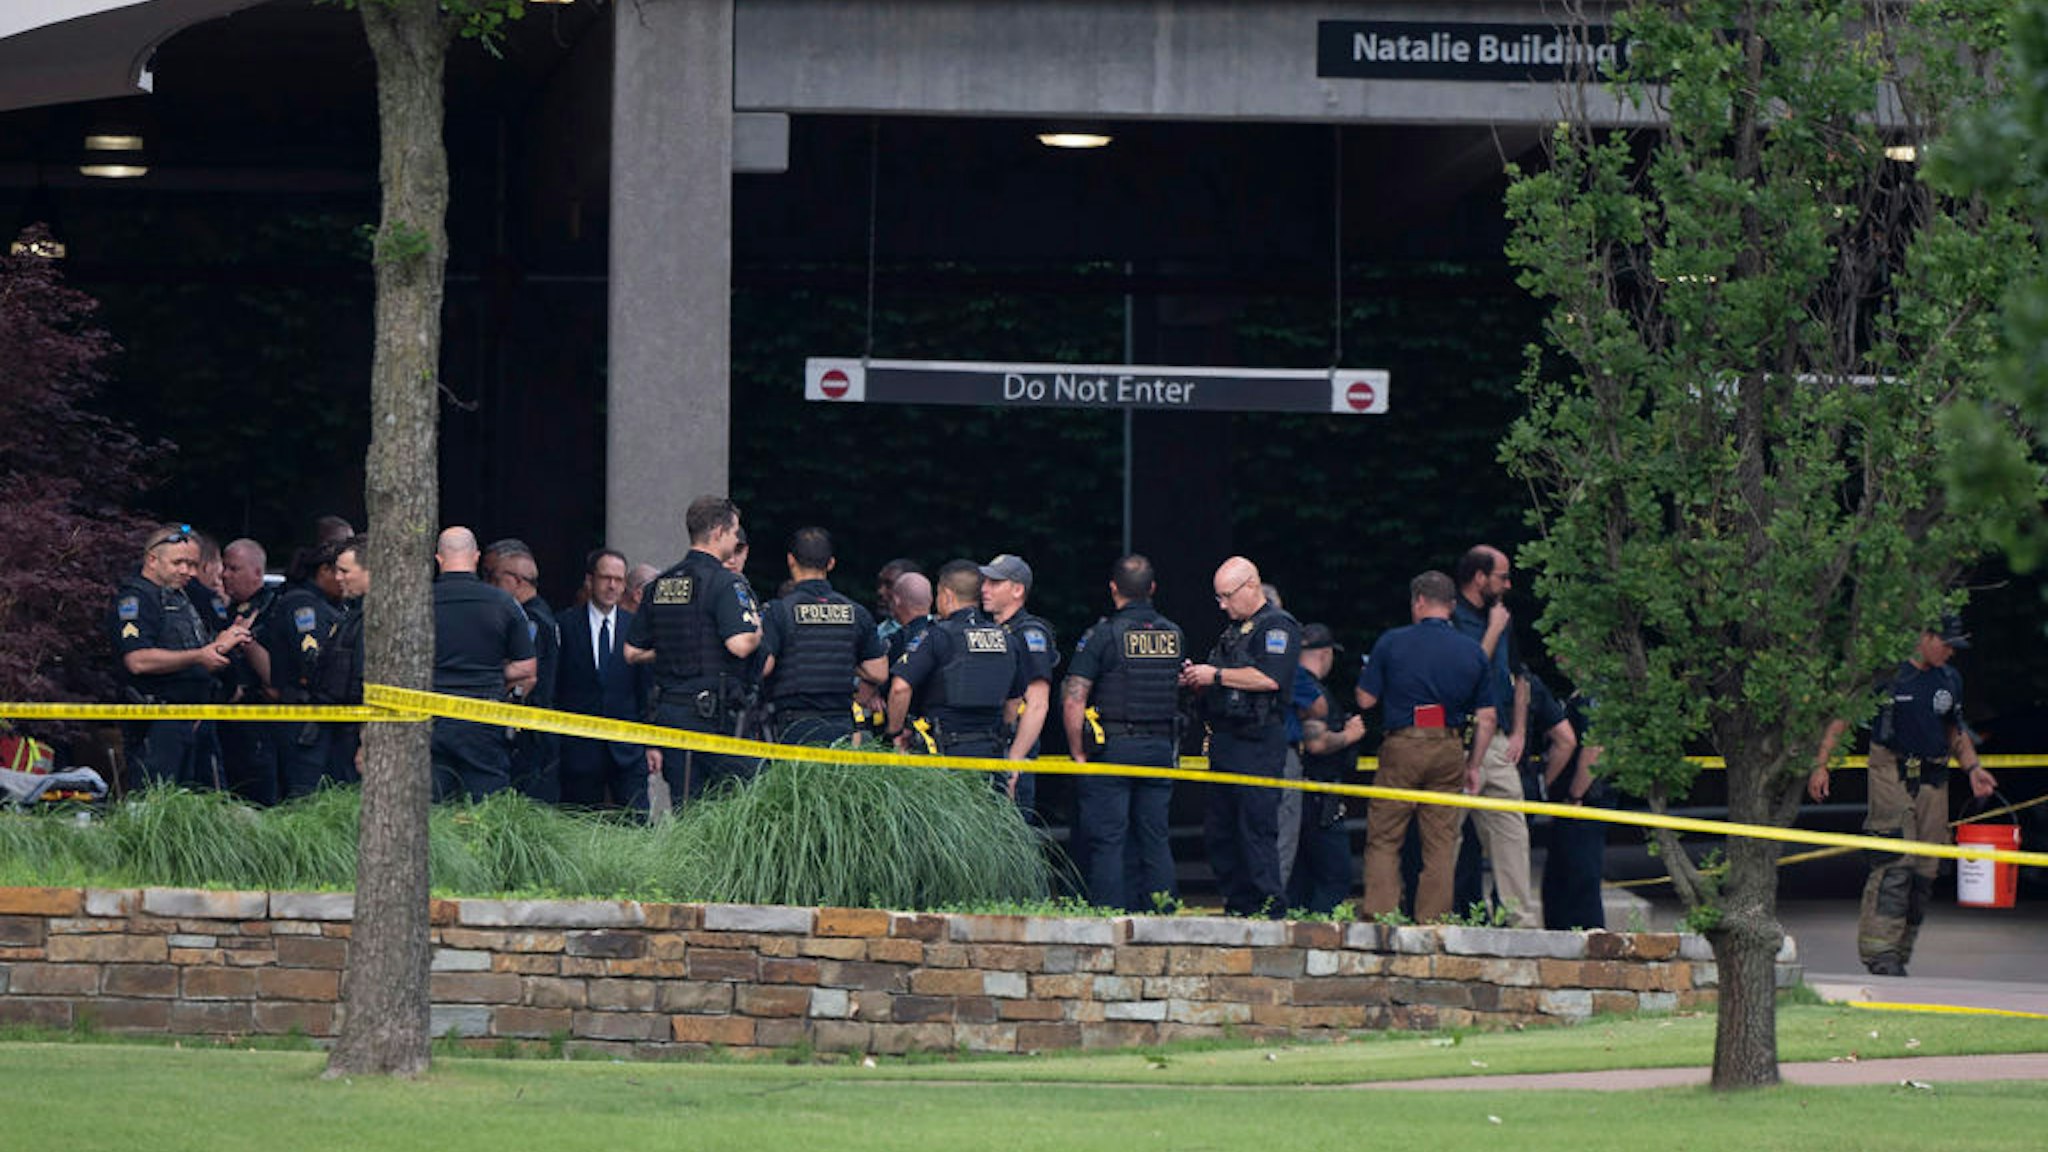 Police respond to the scene of a mass shooting on at St. Francis Hospital on June 1, 2022 in Tulsa, Oklahoma.